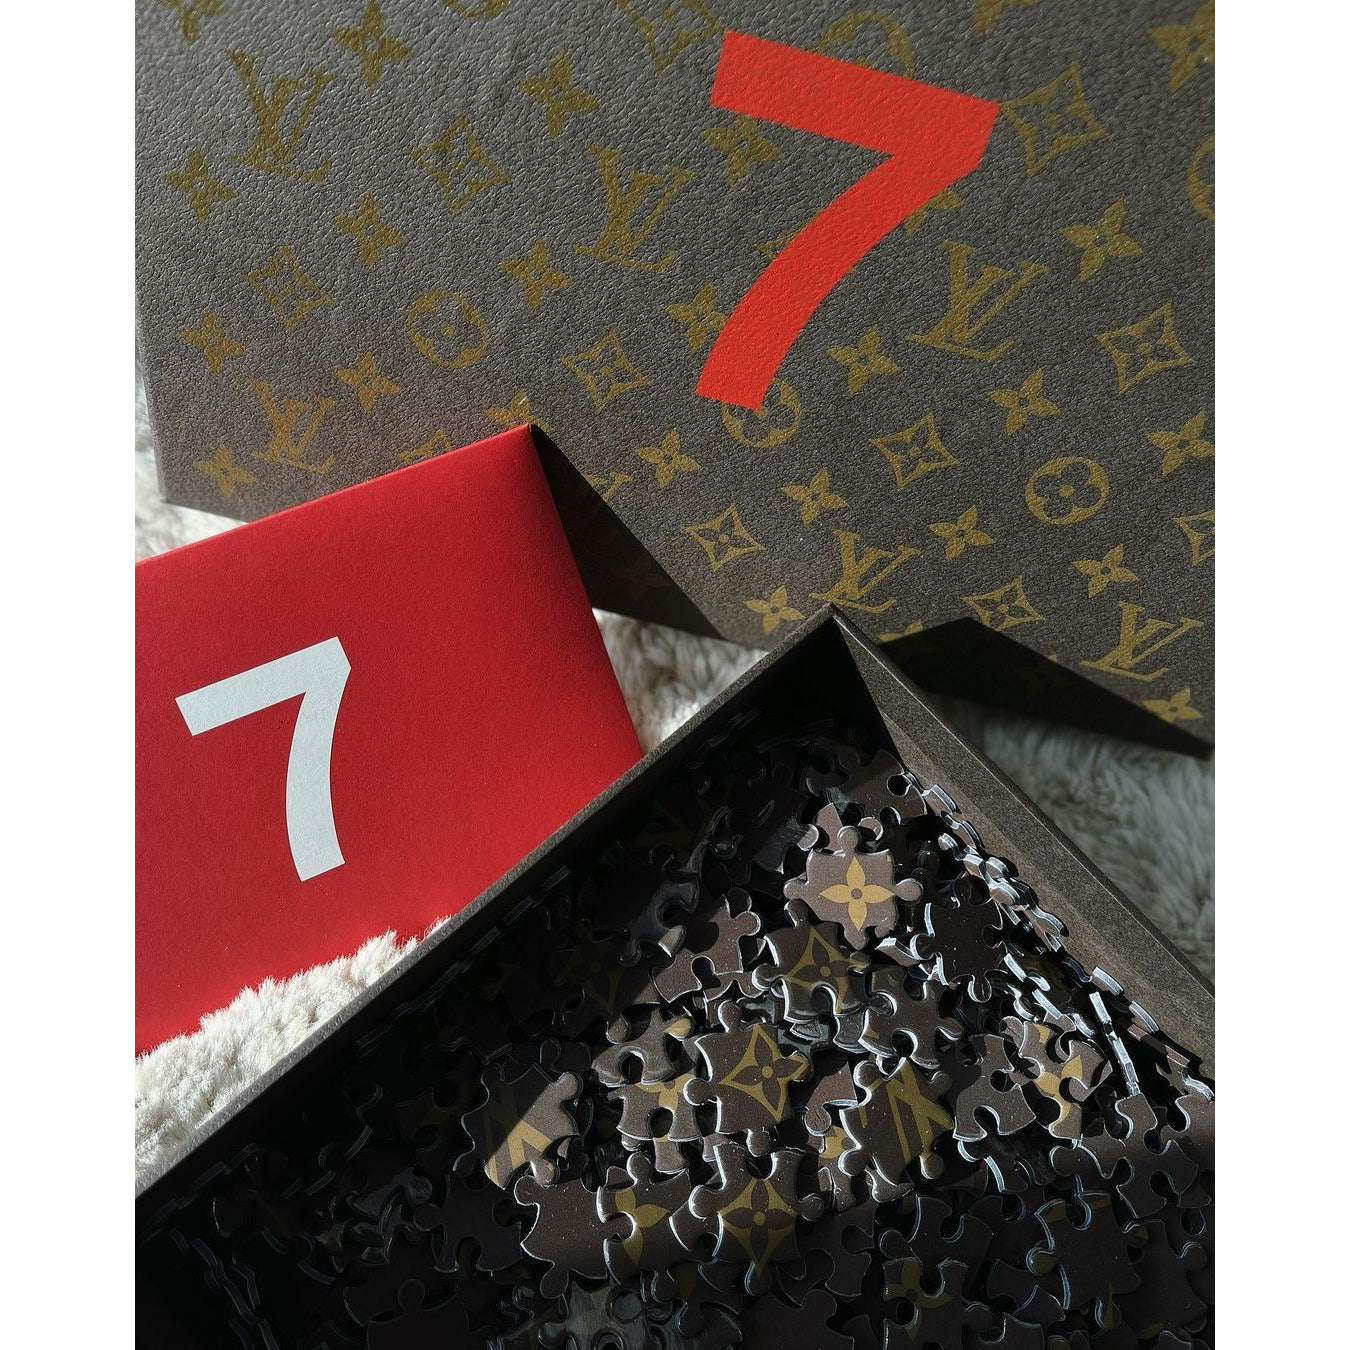 LOUIS VUITTON EMBOSSED LV LOGO INVITE TO RUNWAY SPIN OFF SHOW W